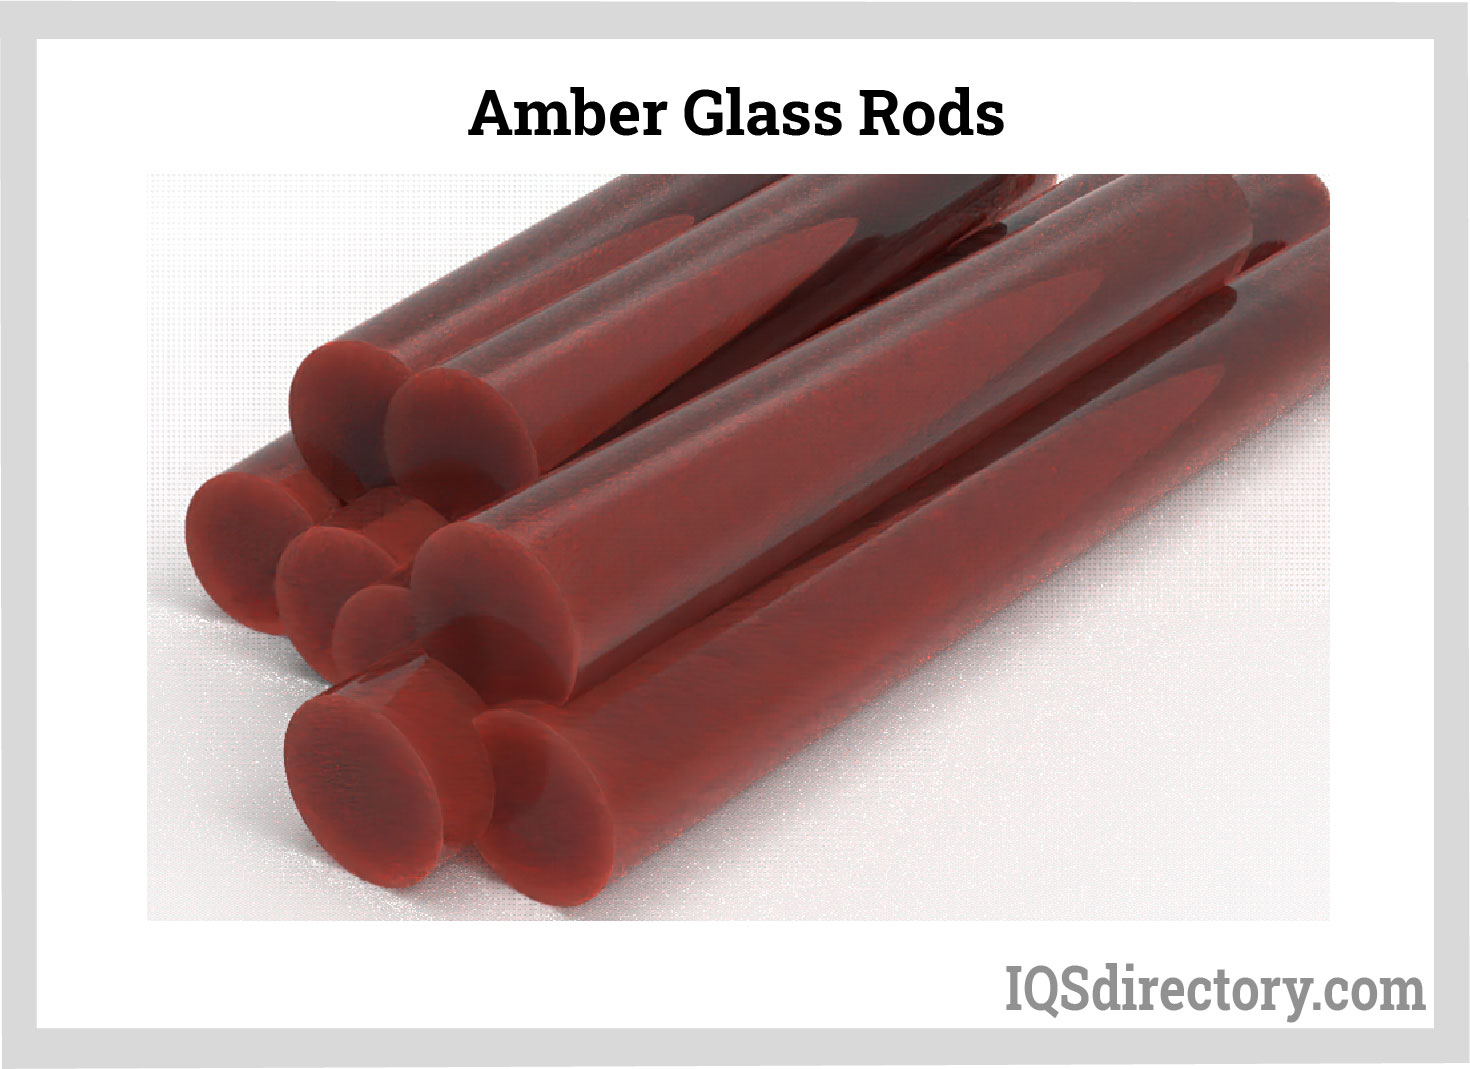 Amber Glass Rods